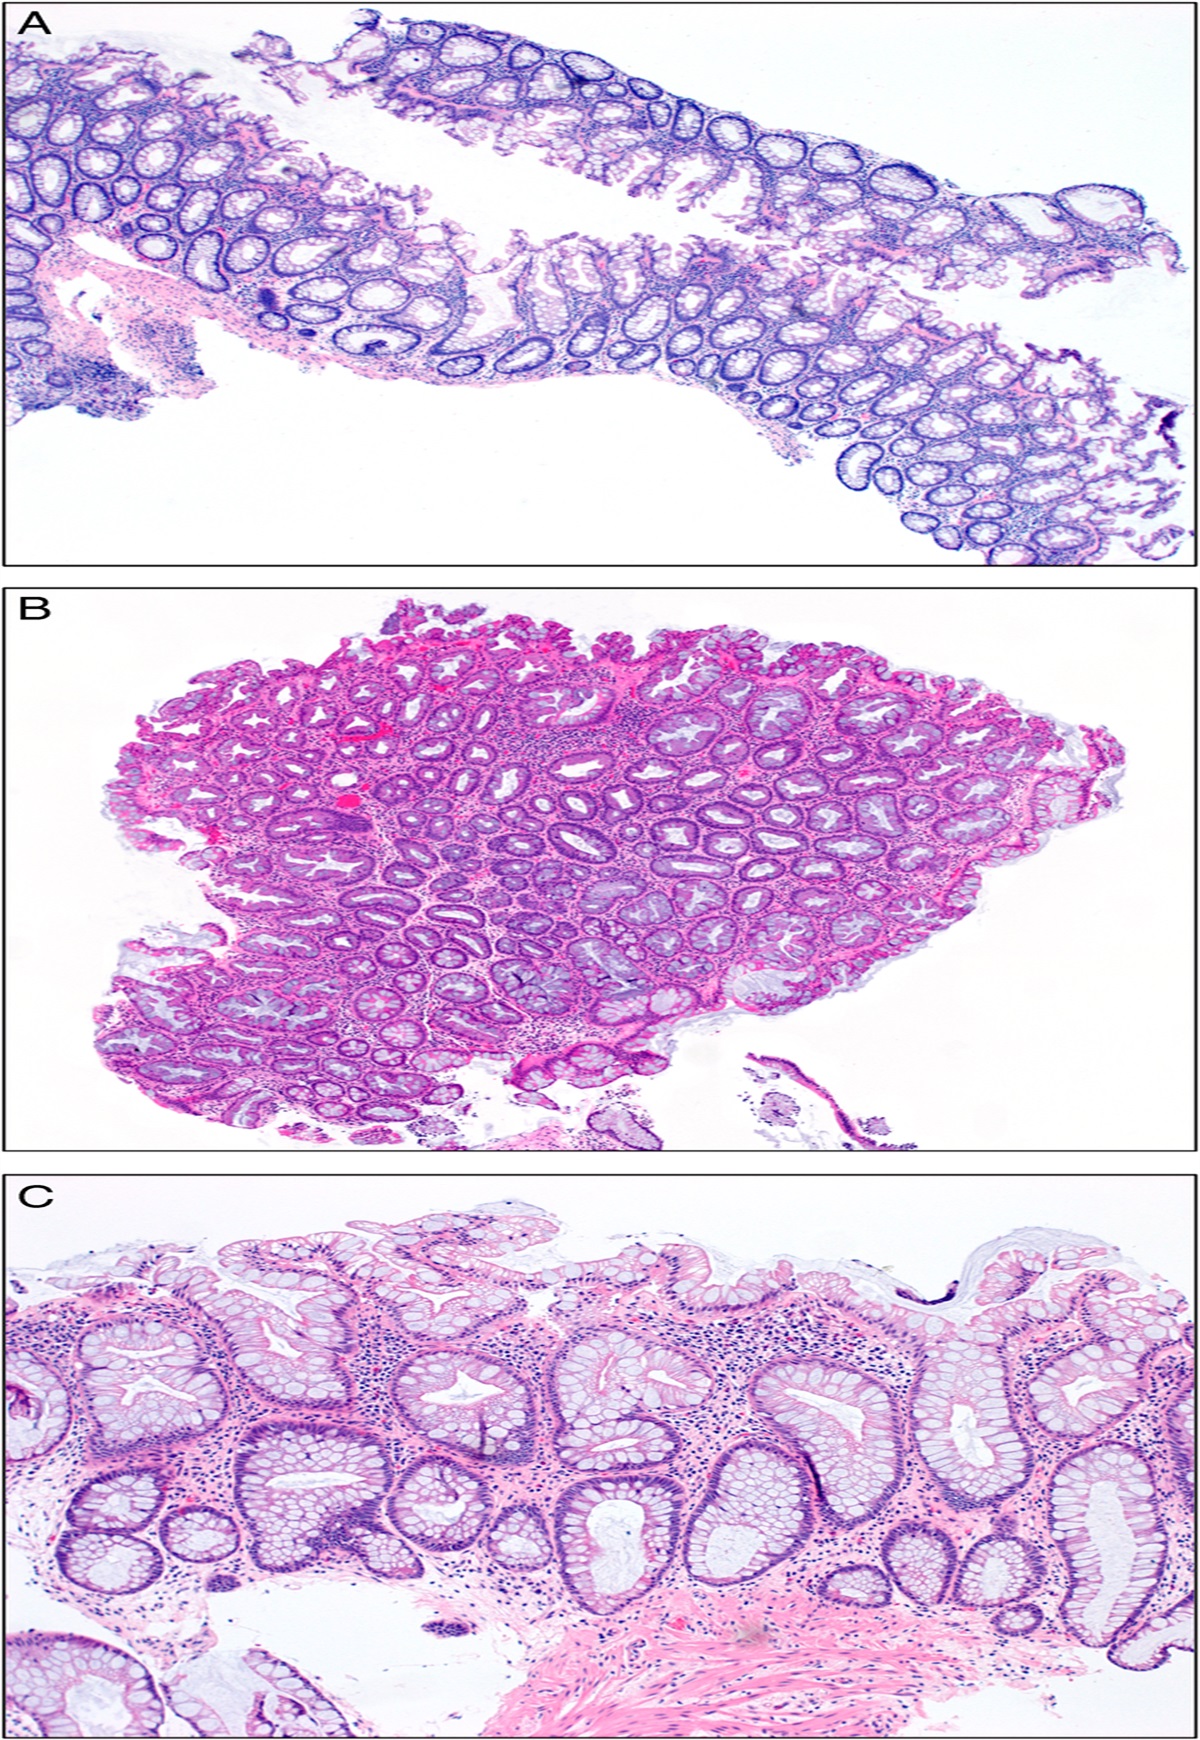 The Development of Serrated Epithelial Change in Ulcerative Colitis is not Significantly Associated With Increased Histologic Inflammation